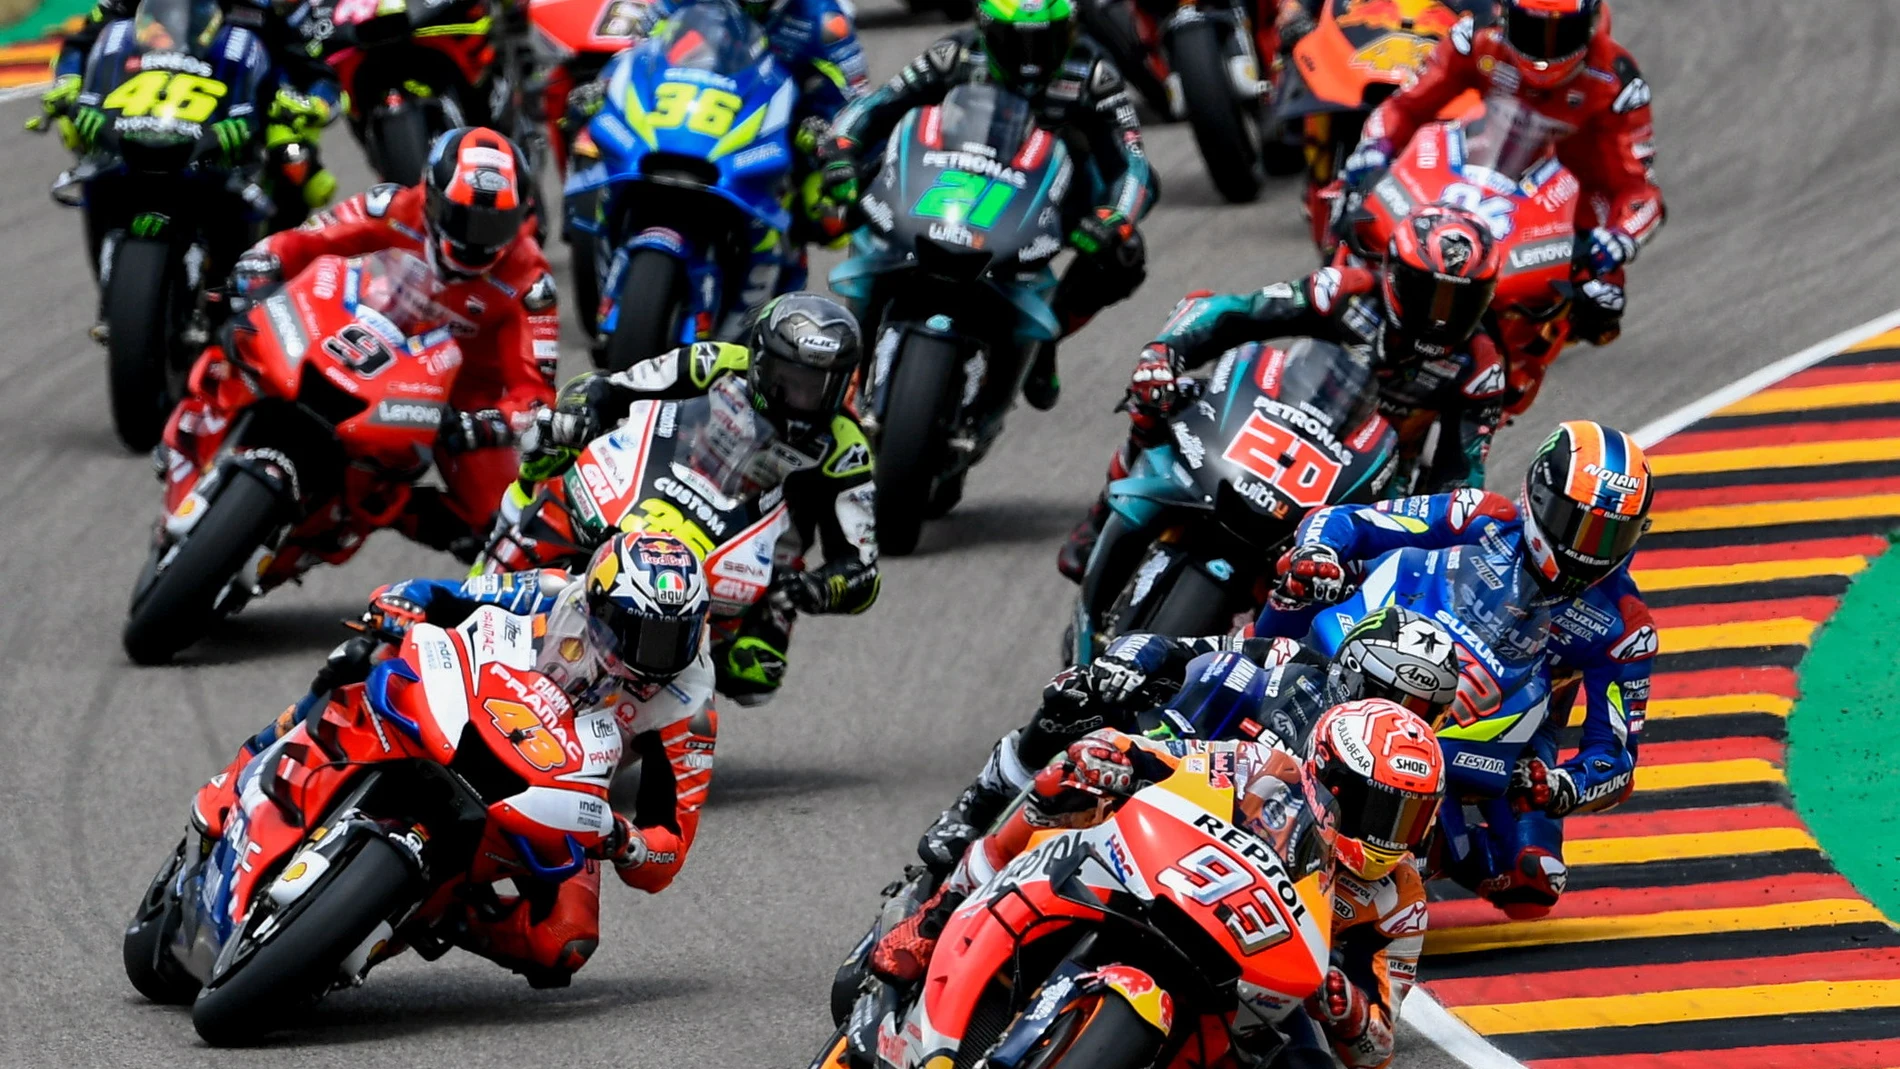 2020 Motorcycling Grand Prix of Germany cancelled